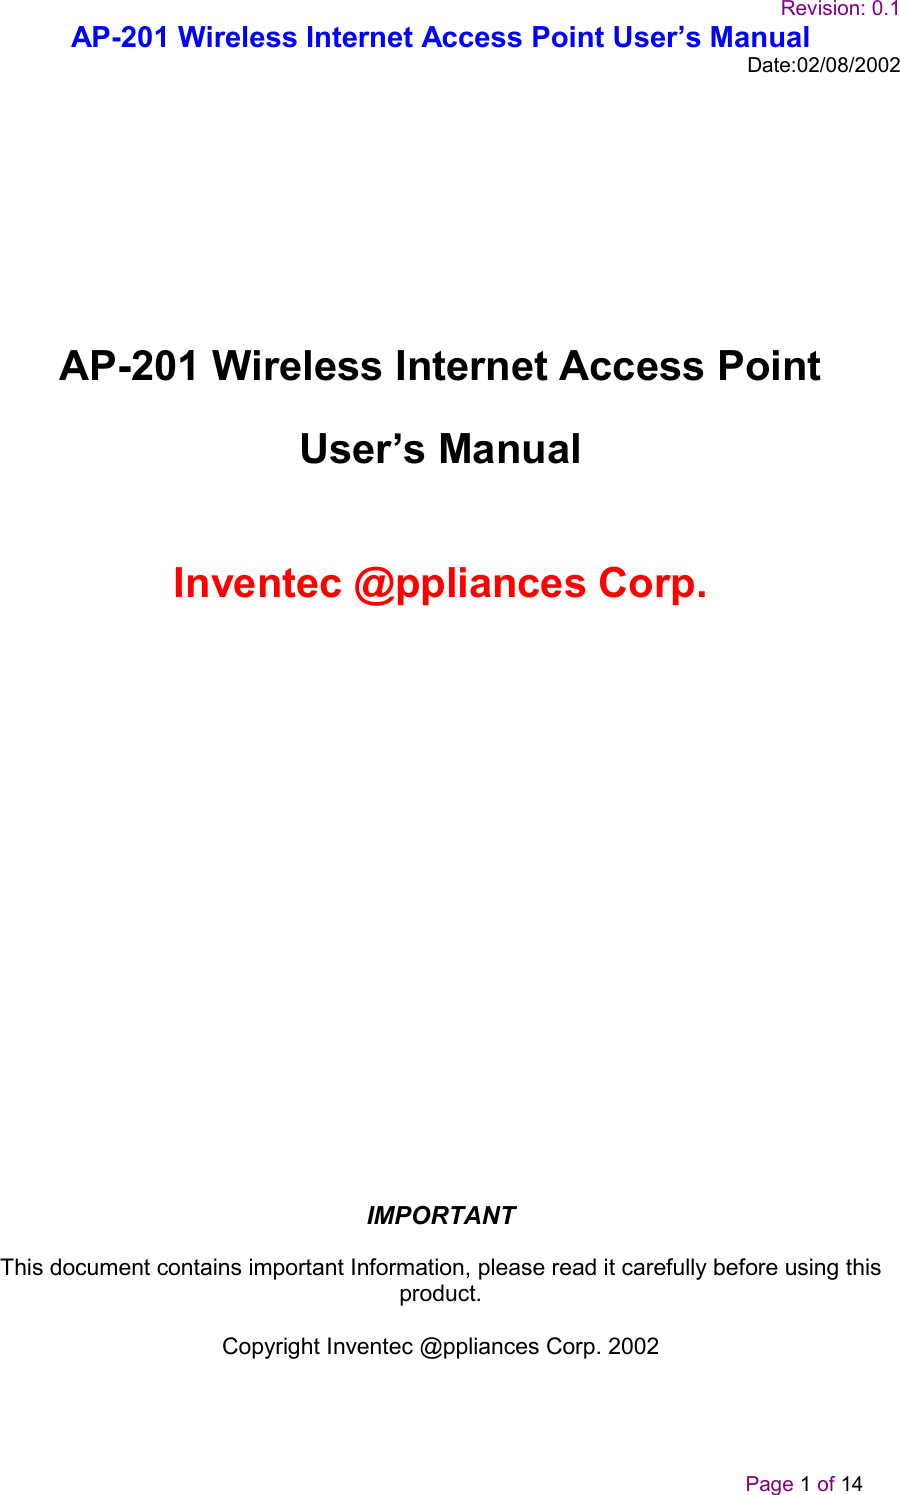 Revision: 0.1AP-201 Wireless Internet Access Point User’s ManualDate:02/08/2002                                   Page 1 of 14AP-201 Wireless Internet Access PointUser’s ManualInventec @ppliances Corp.IMPORTANTThis document contains important Information, please read it carefully before using thisproduct.Copyright Inventec @ppliances Corp. 2002